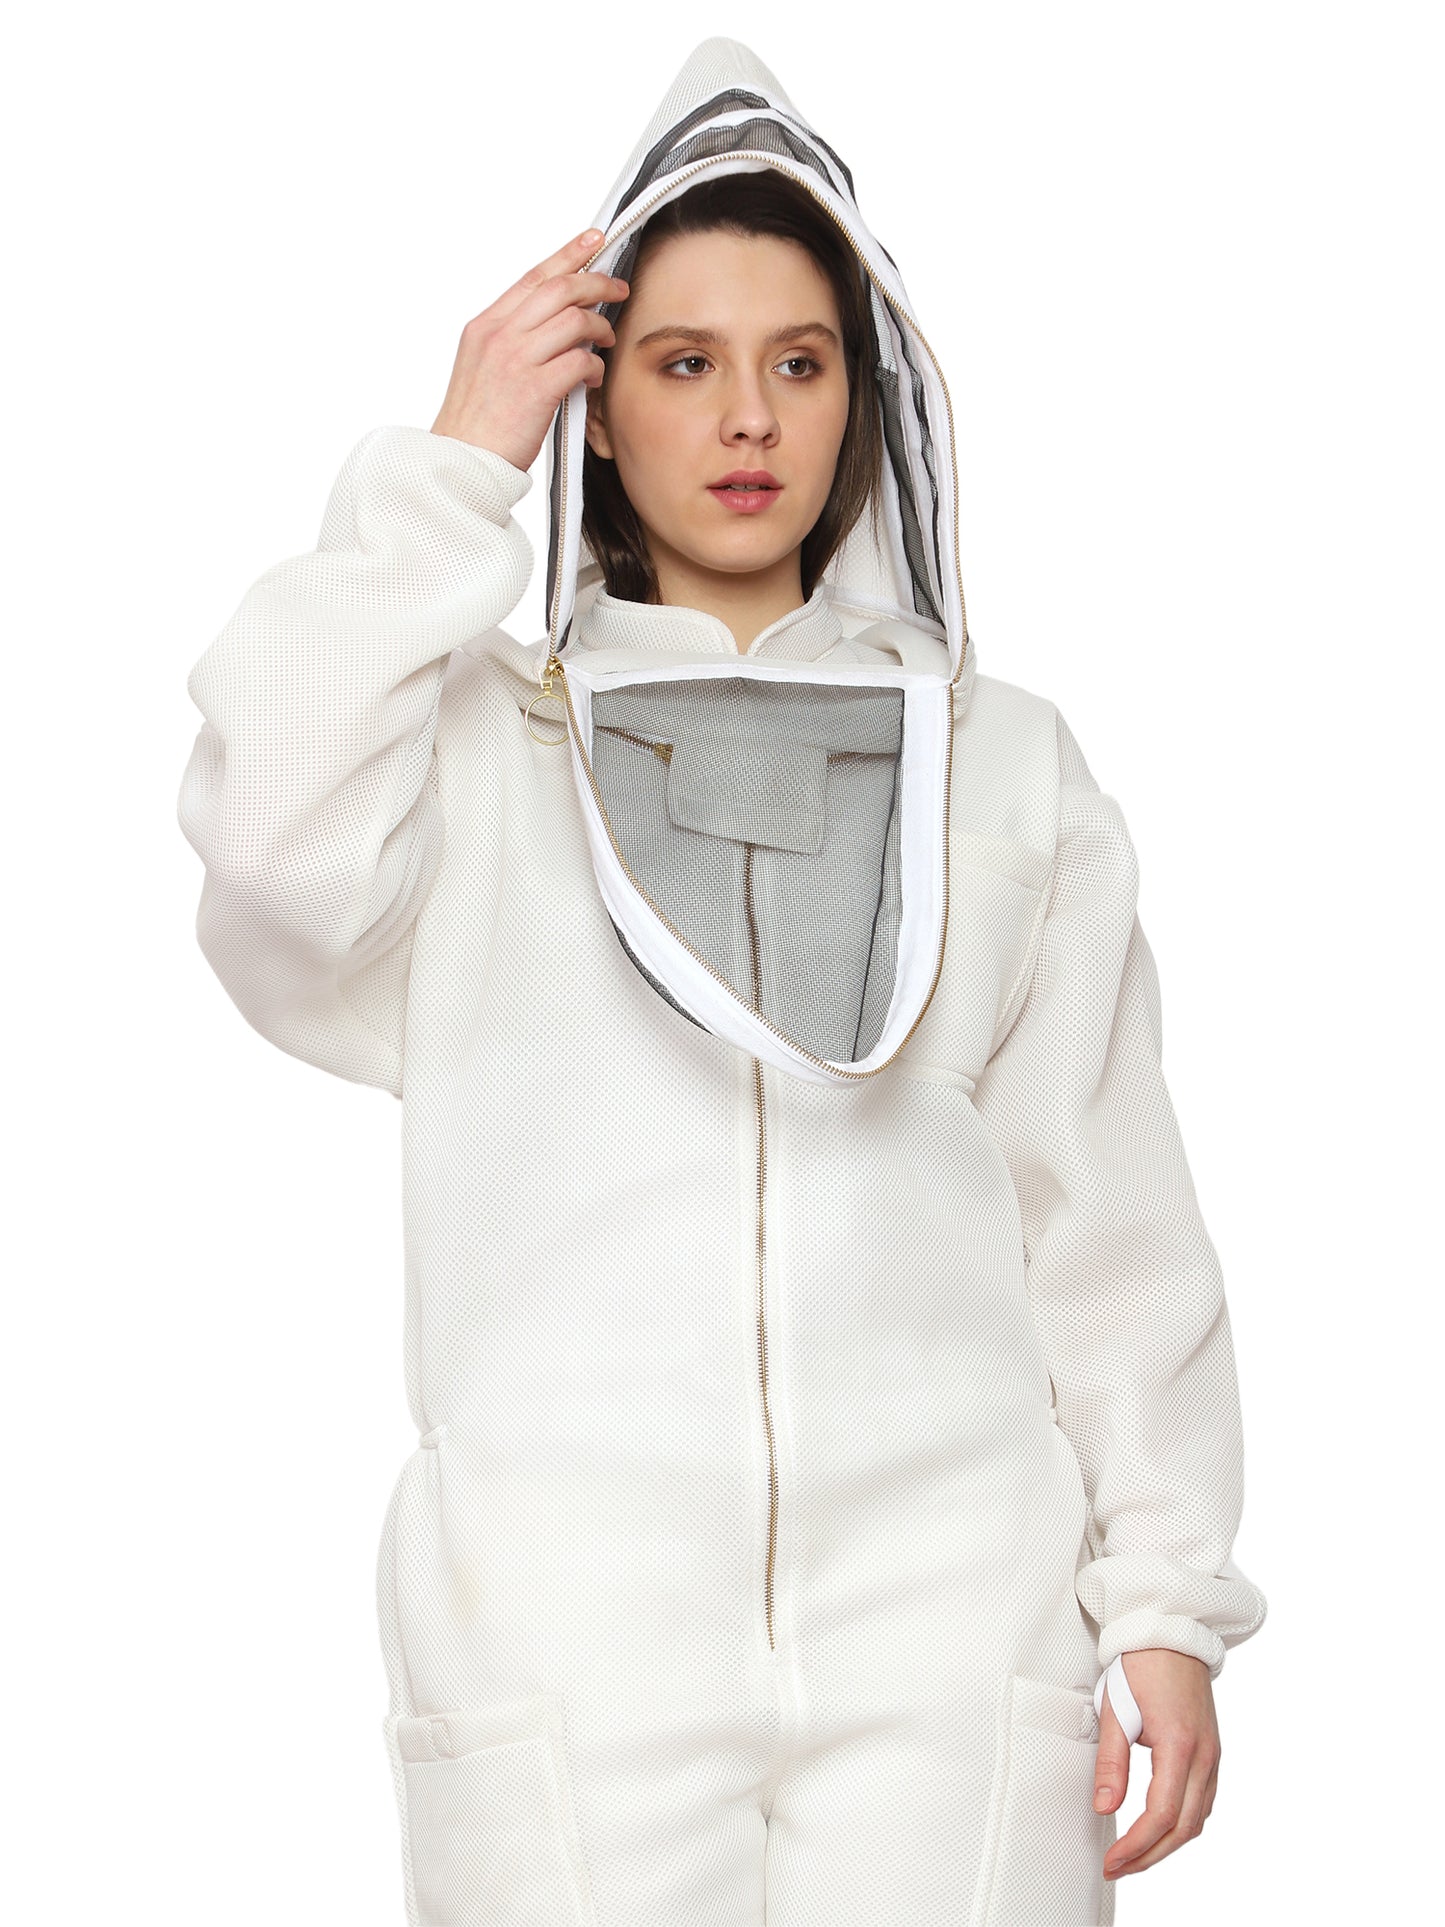 Beeattire Airmesh Bee Suit with Easy Access Veil - Ventilated Bee Suit